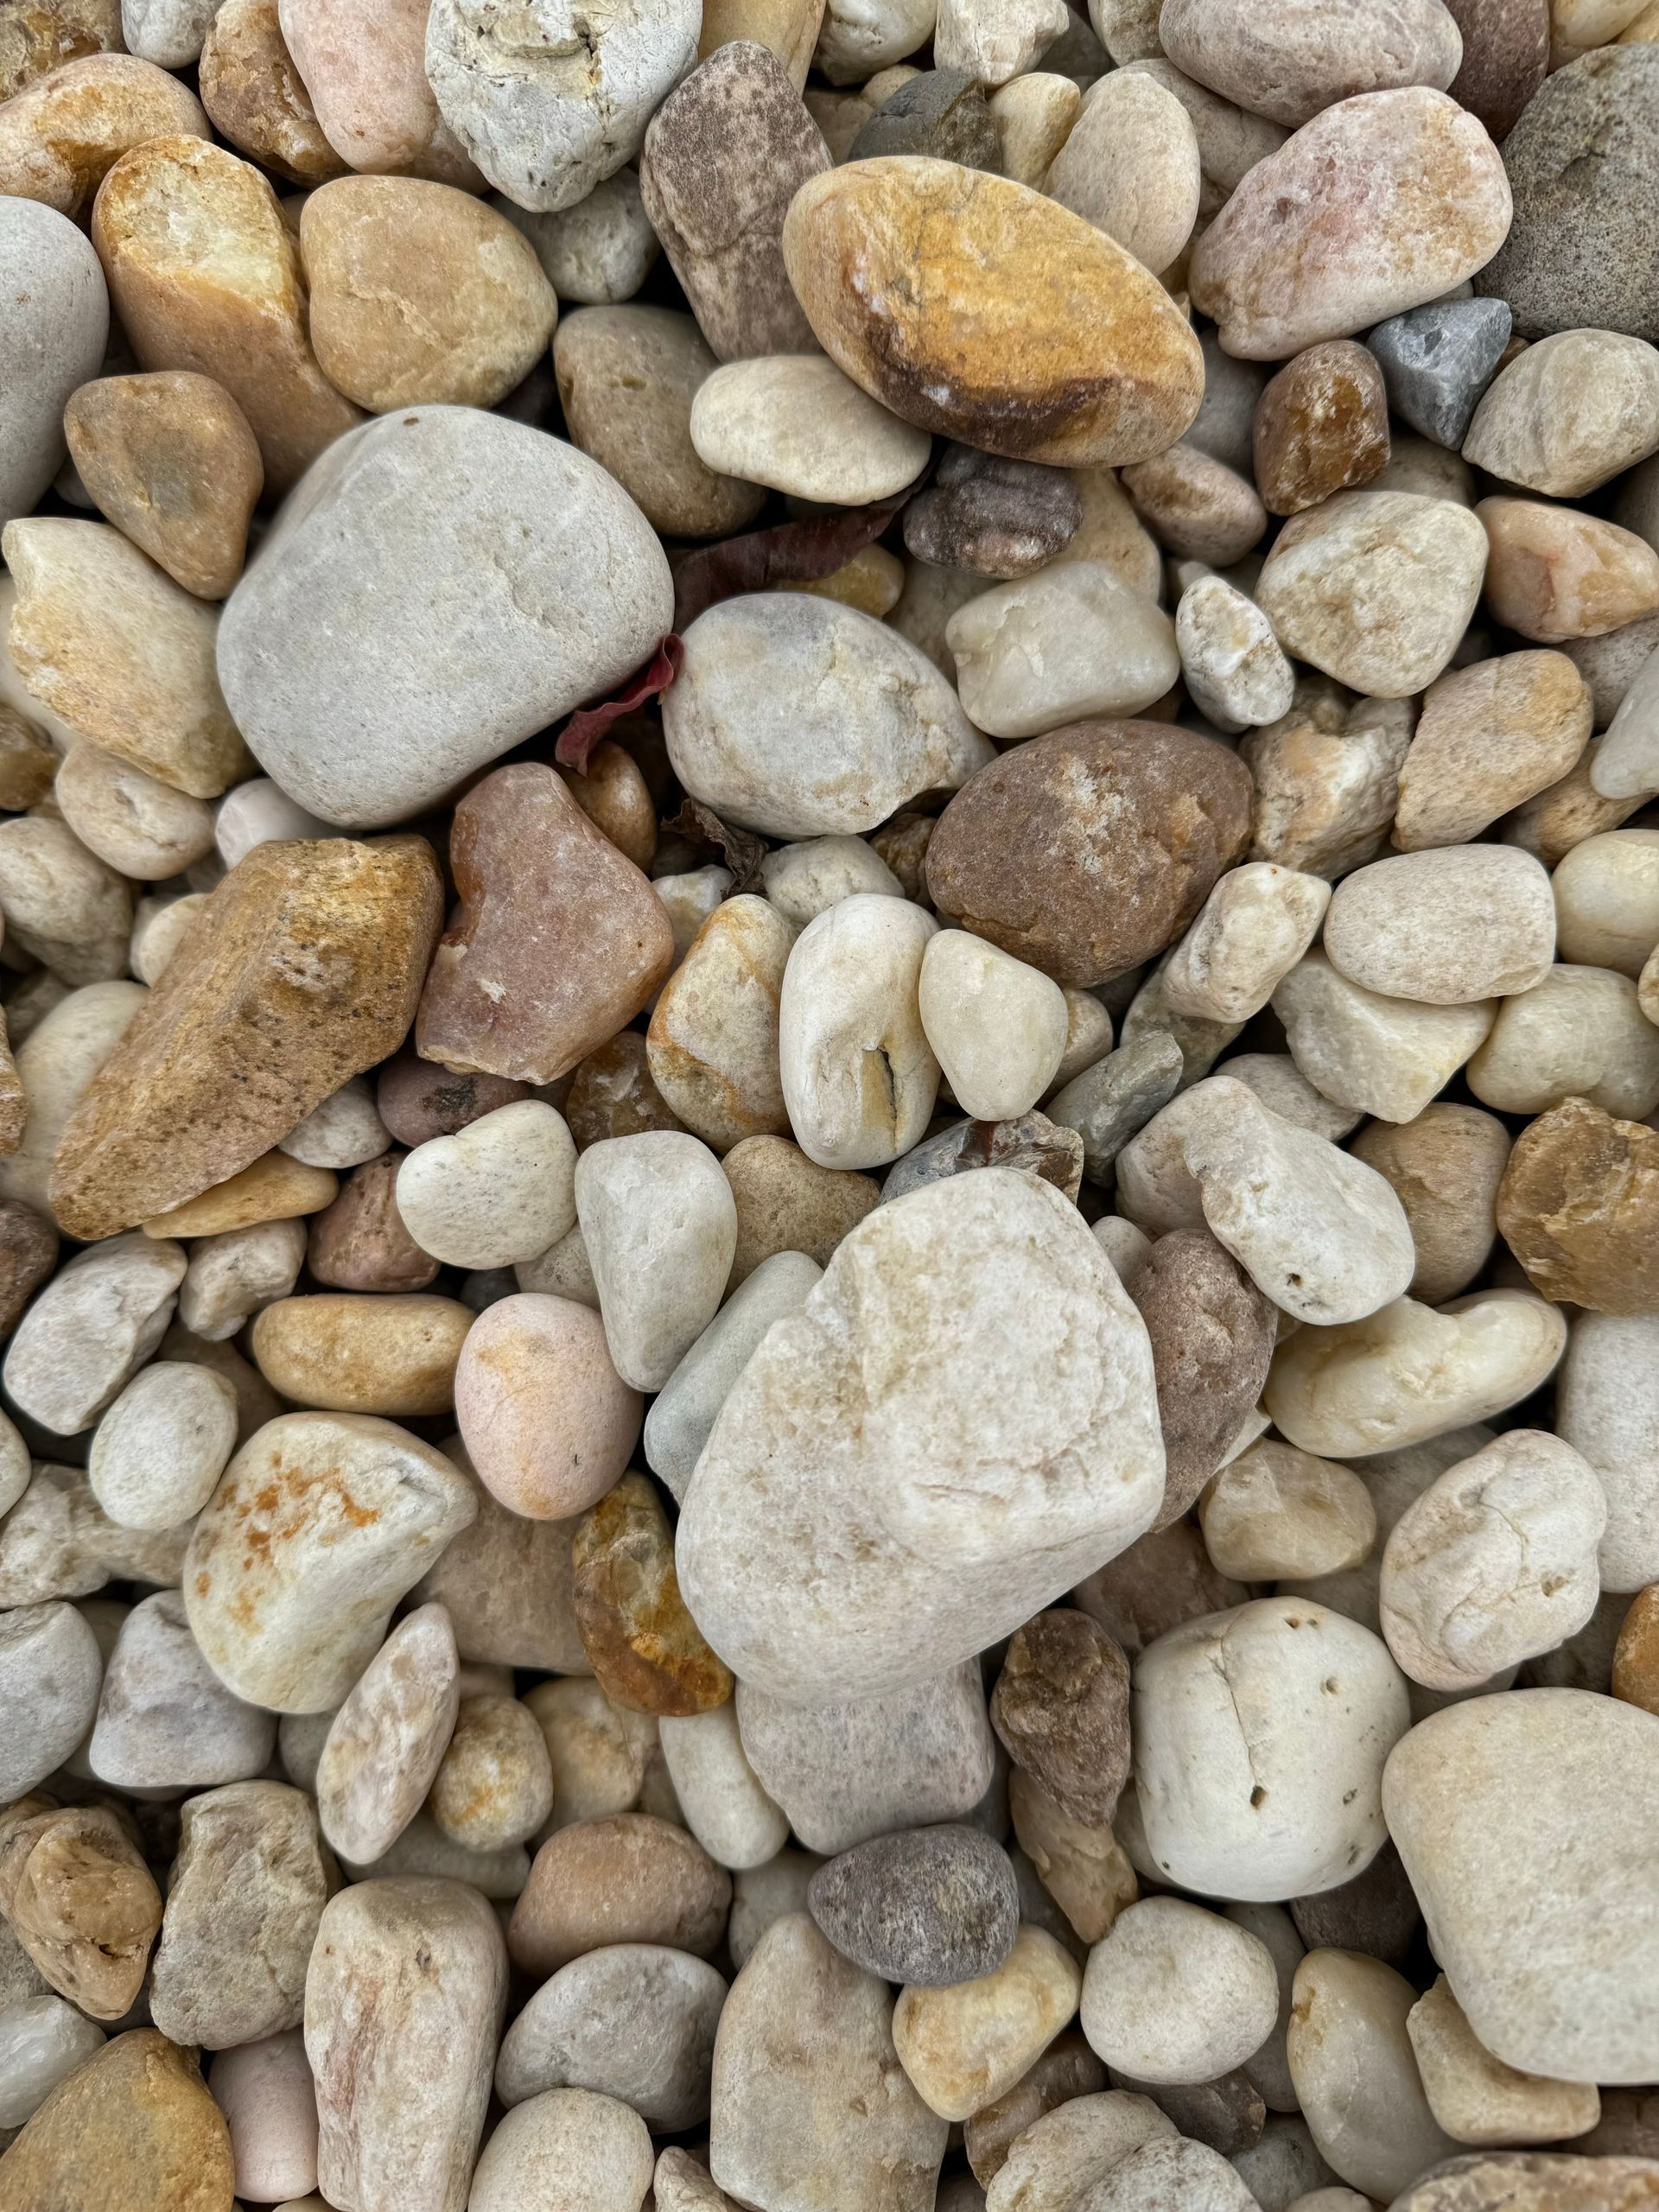 White river gravel - Gravel Products in Florida